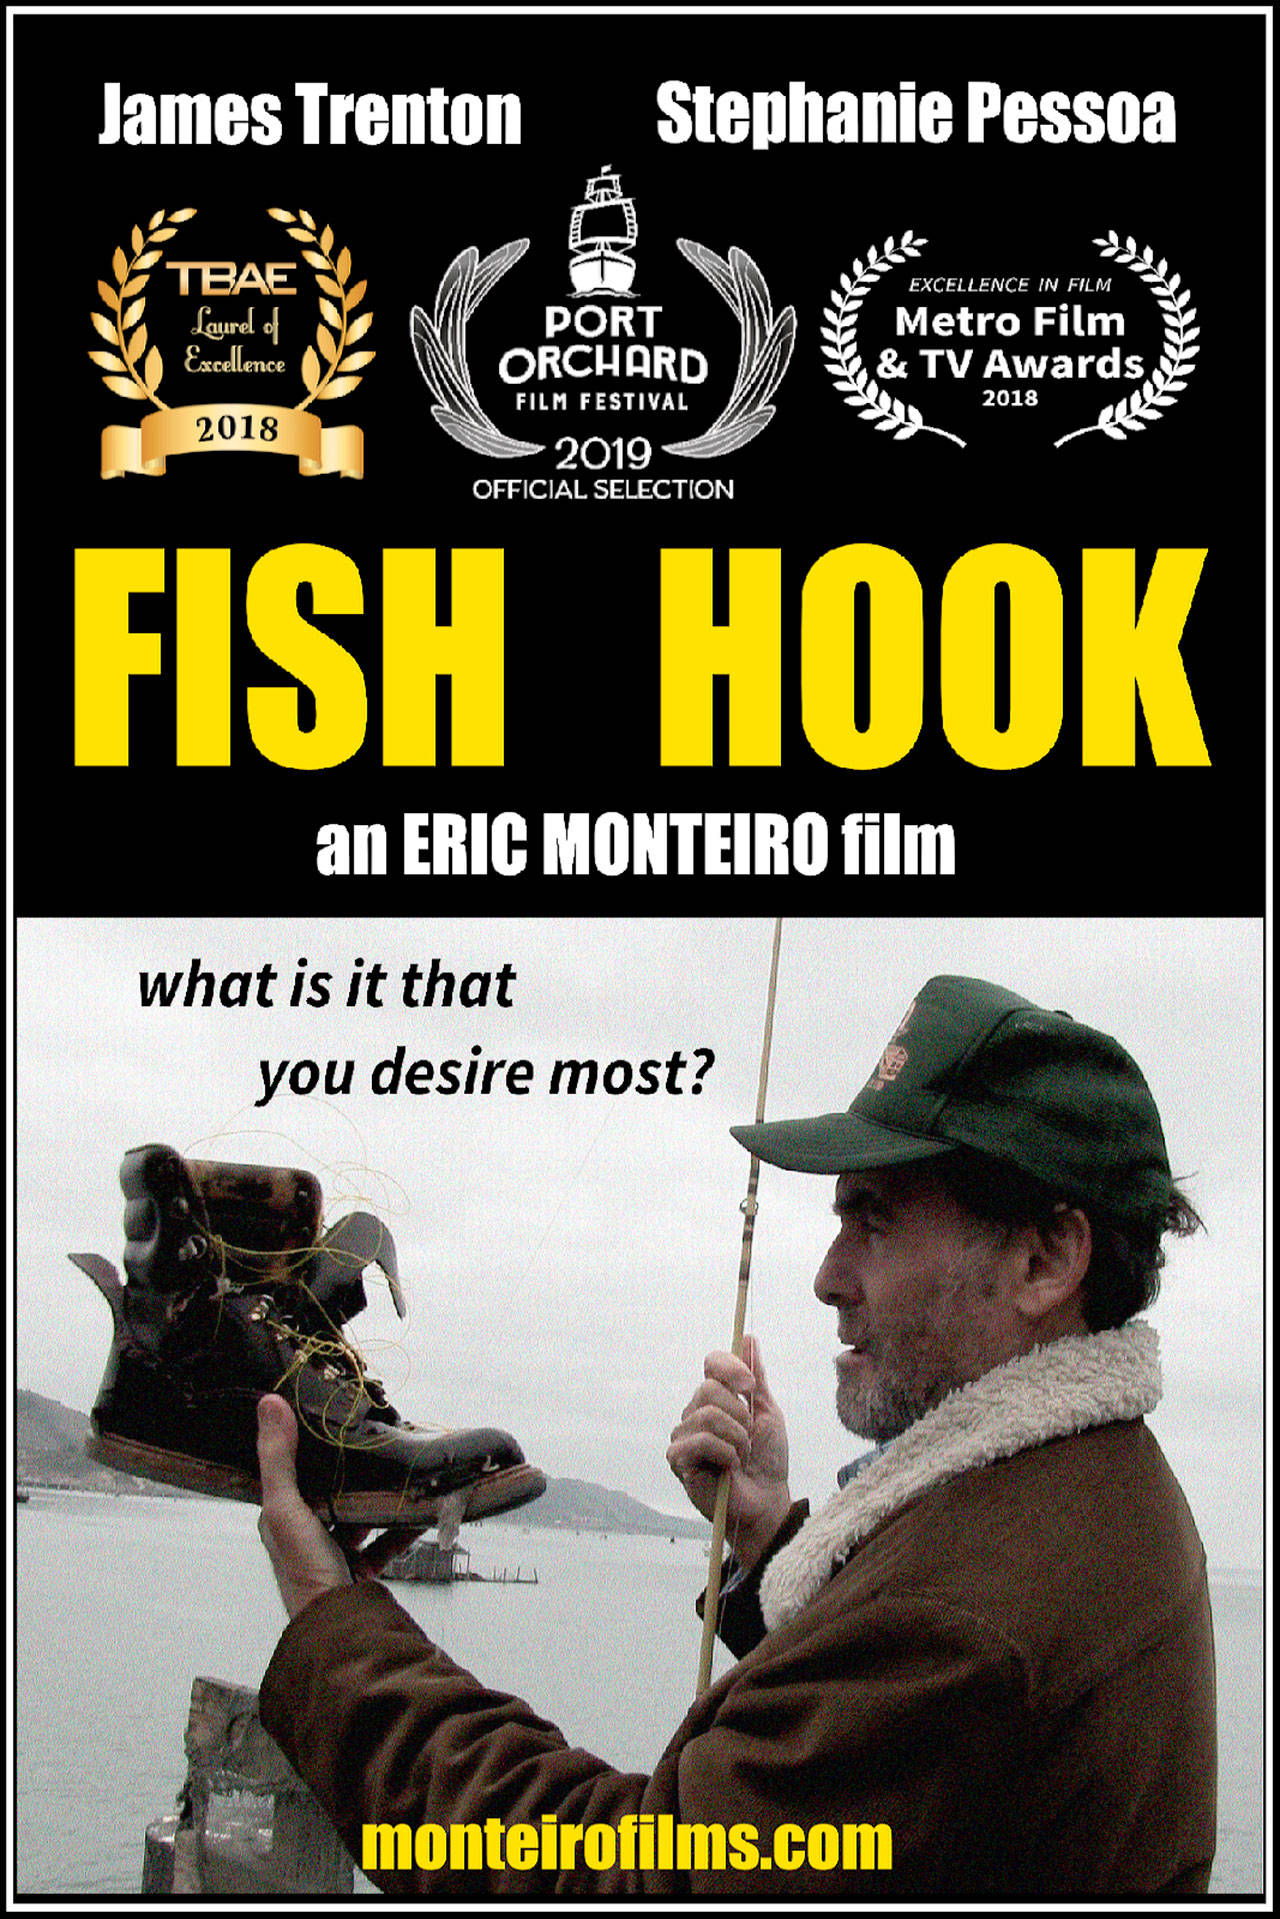 Filmmaker Eric Monteiro’s production “Fish Hook” will be screened in the “Fantasy” shorts block on Saturday, May 4, at the Port Orchard Film Festival. (Courtesy of Eric Monteiro)